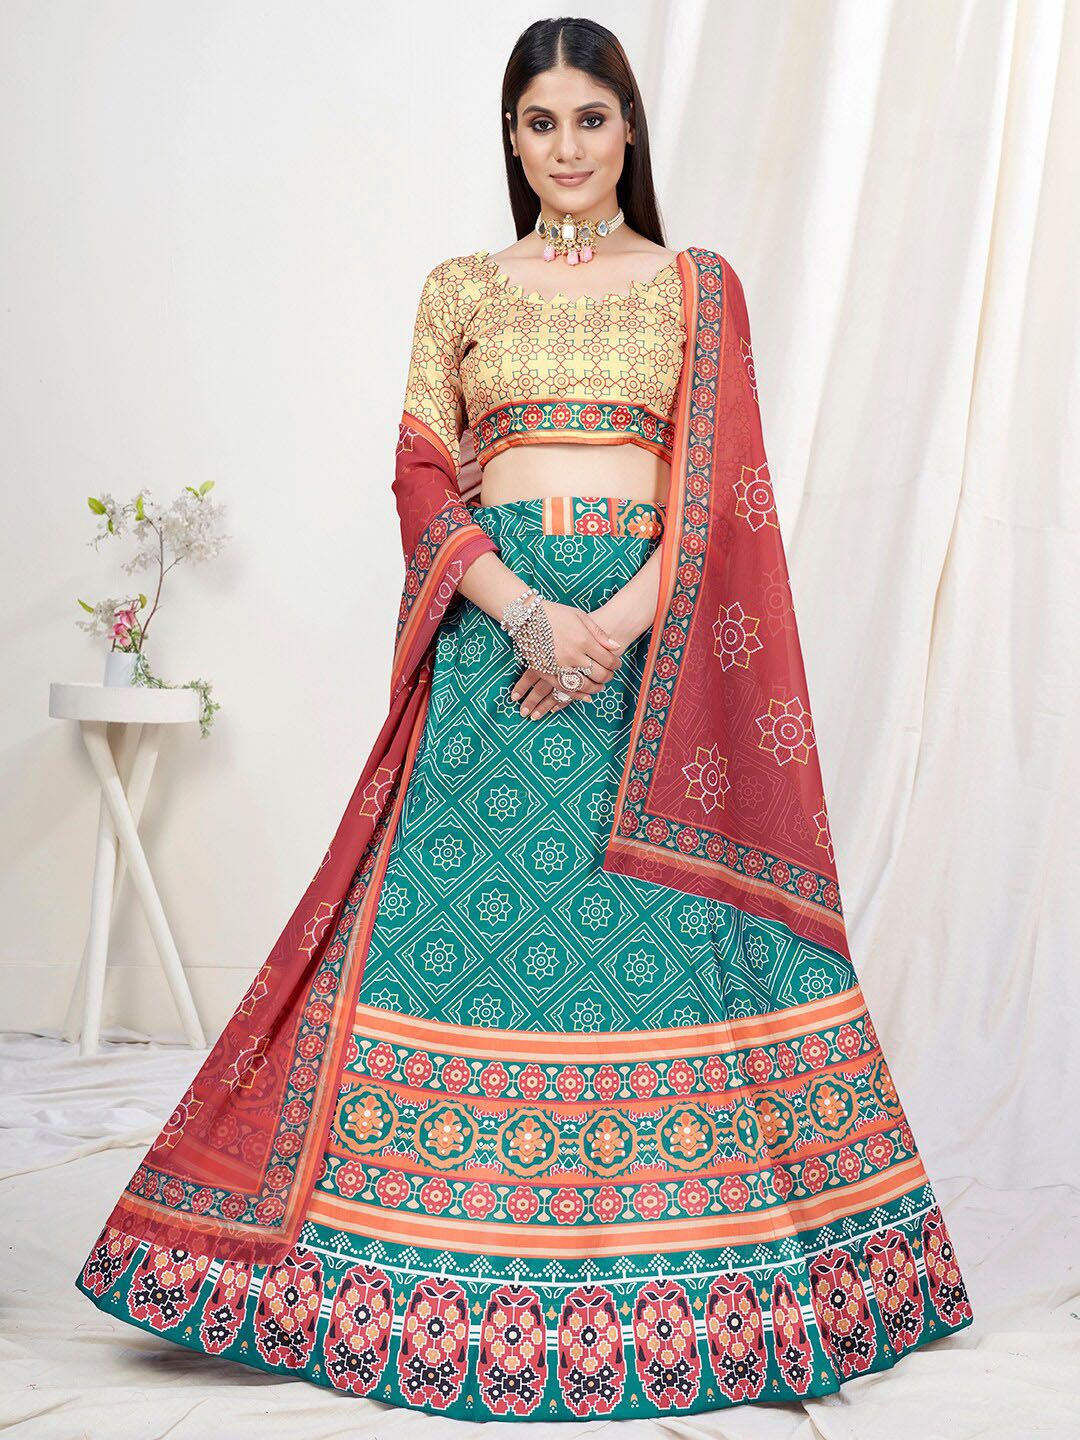 WHITE FIRE Blue & Red Printed Semi-Stitched Lehenga & Unstitched Blouse With Dupatta Price in India